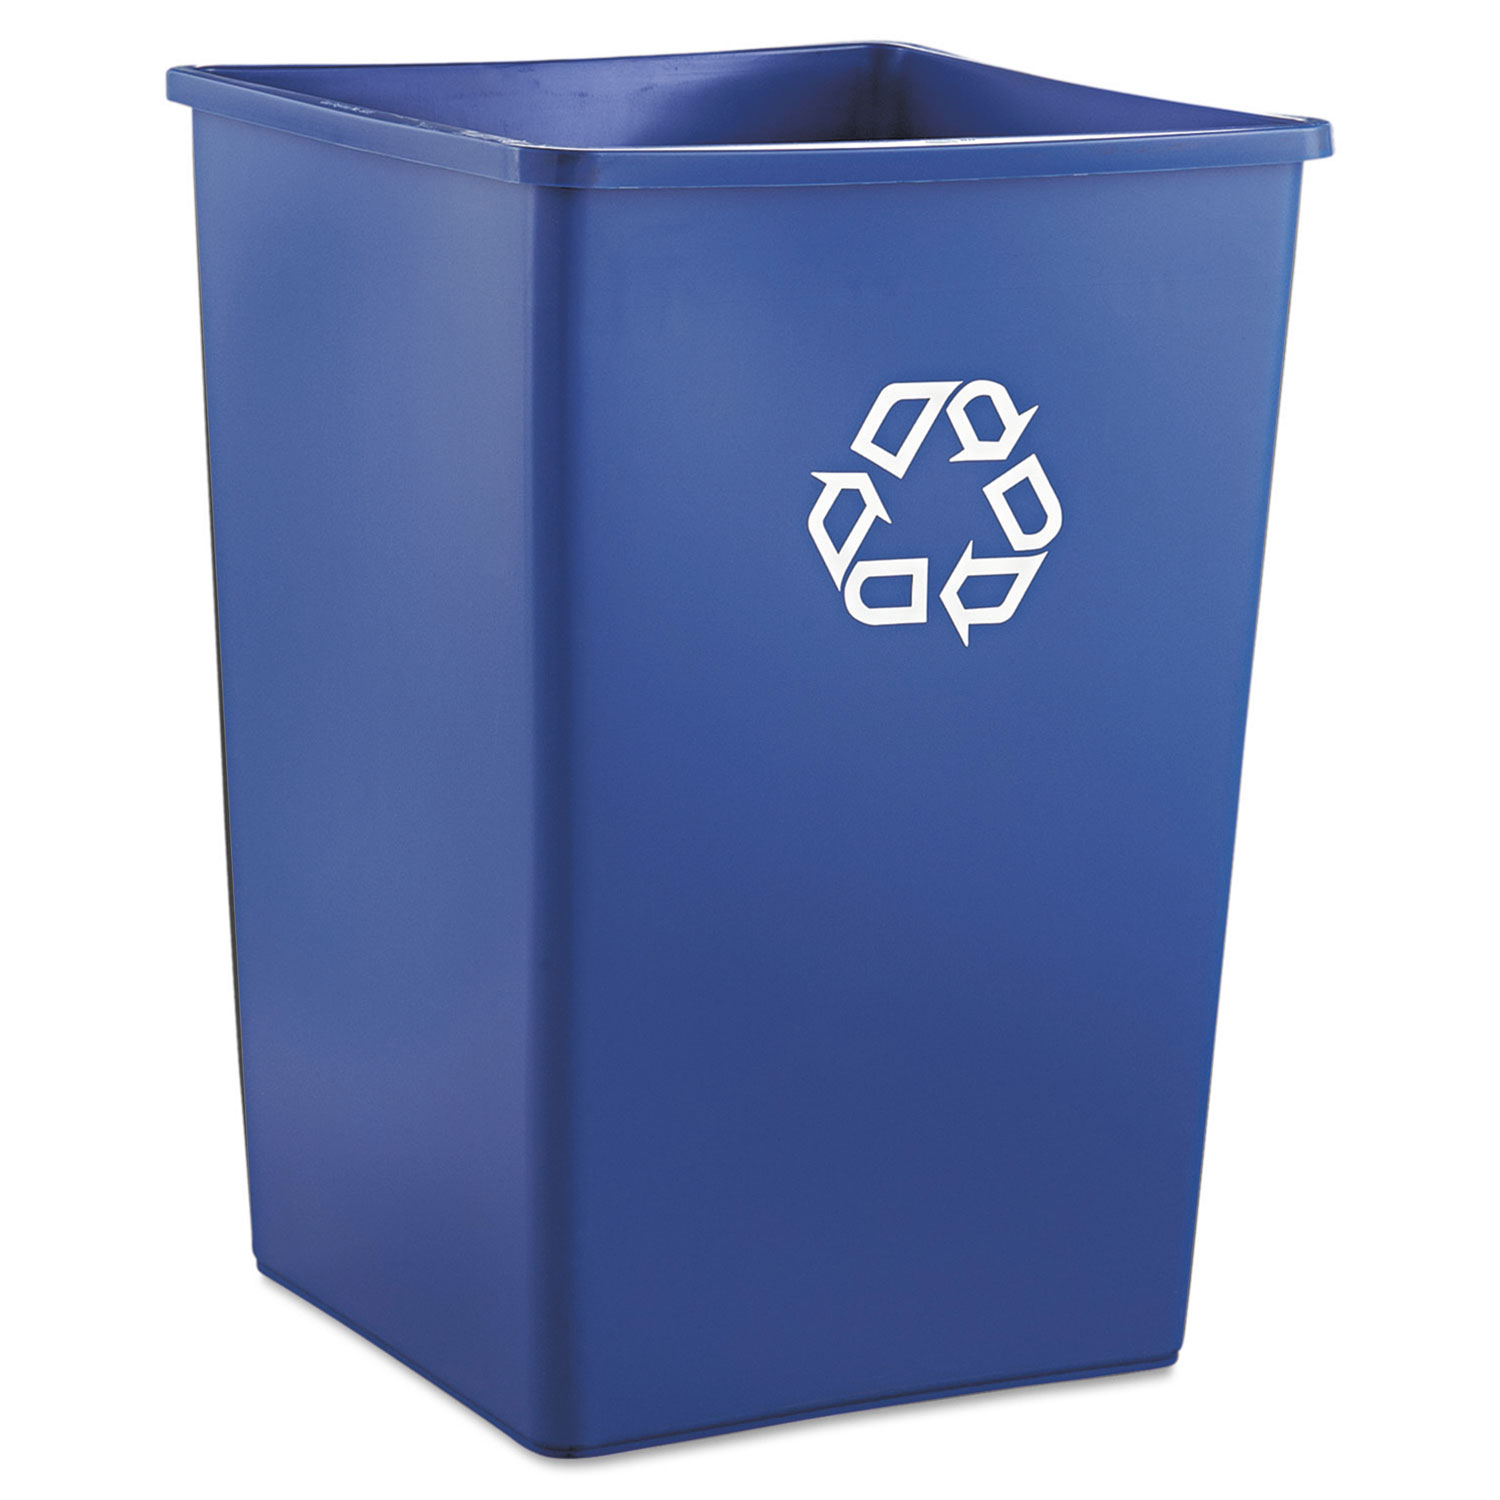 Recycling Container, Square, Plastic, 35 gal, Blue